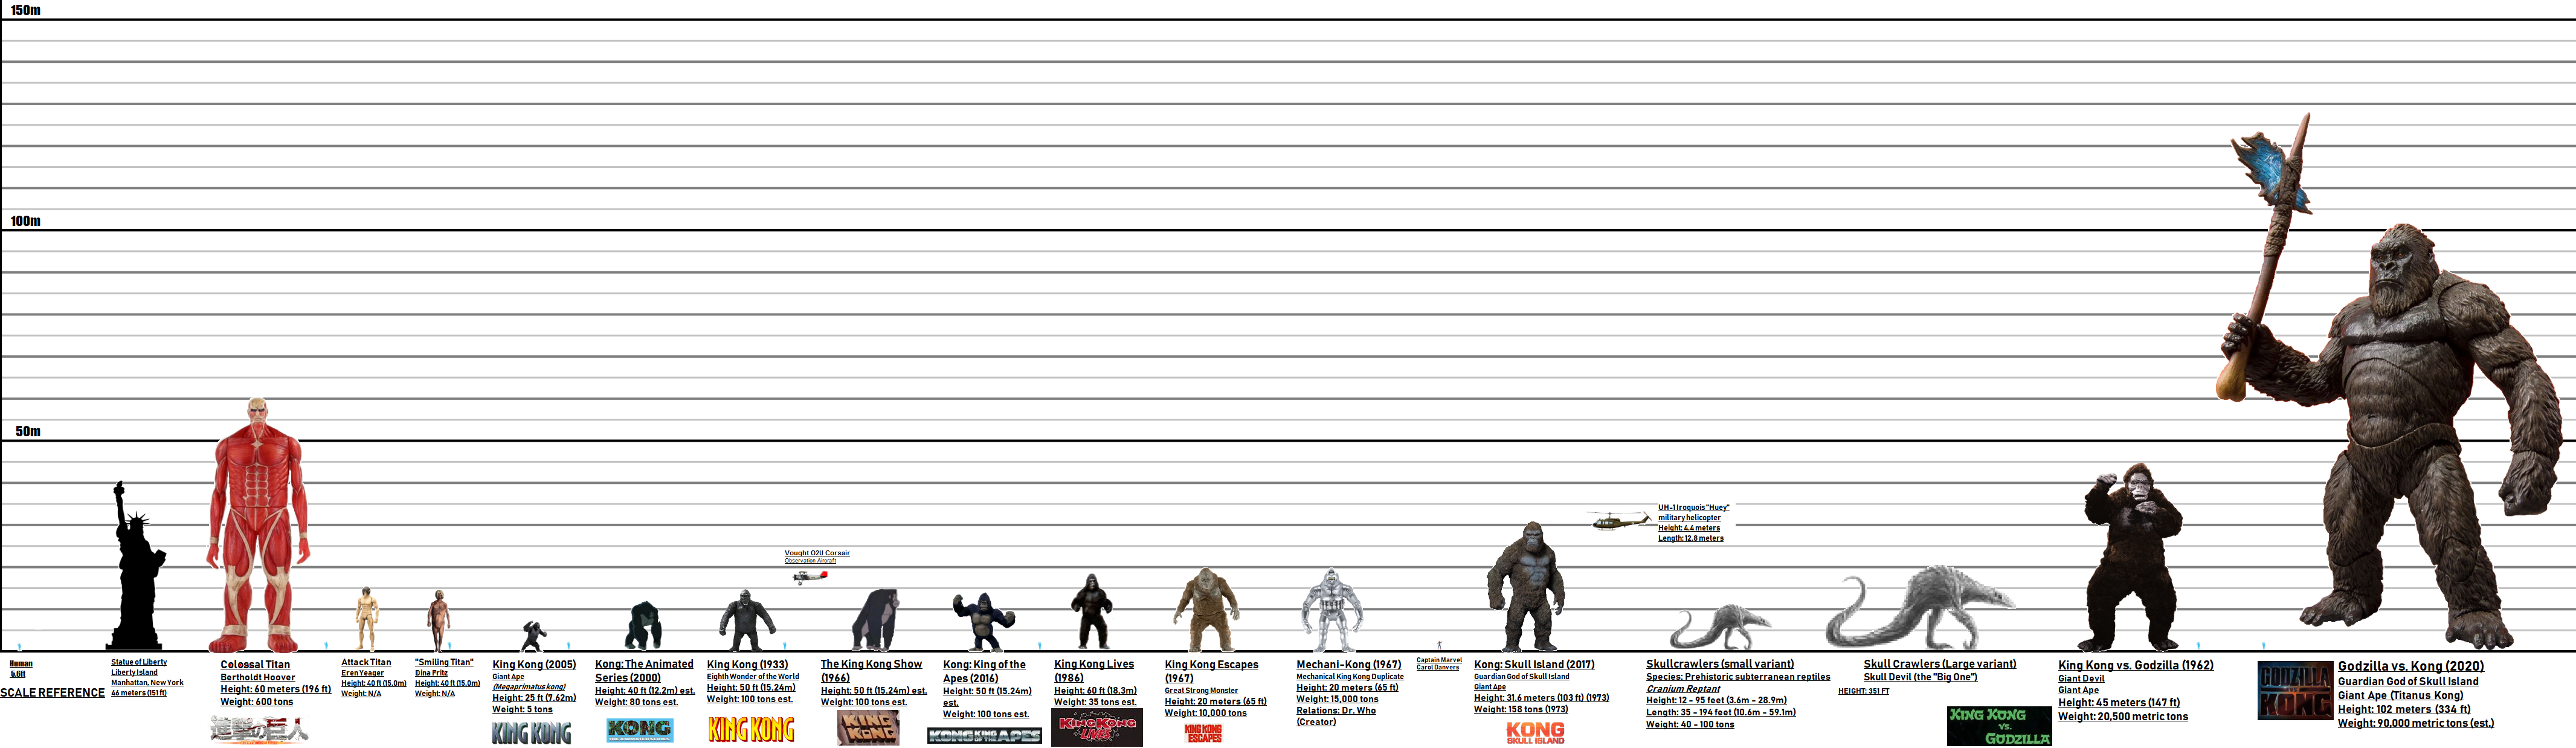 KING KONG Evolutionary Size Chart by KaijuATTACK877 on DeviantArt